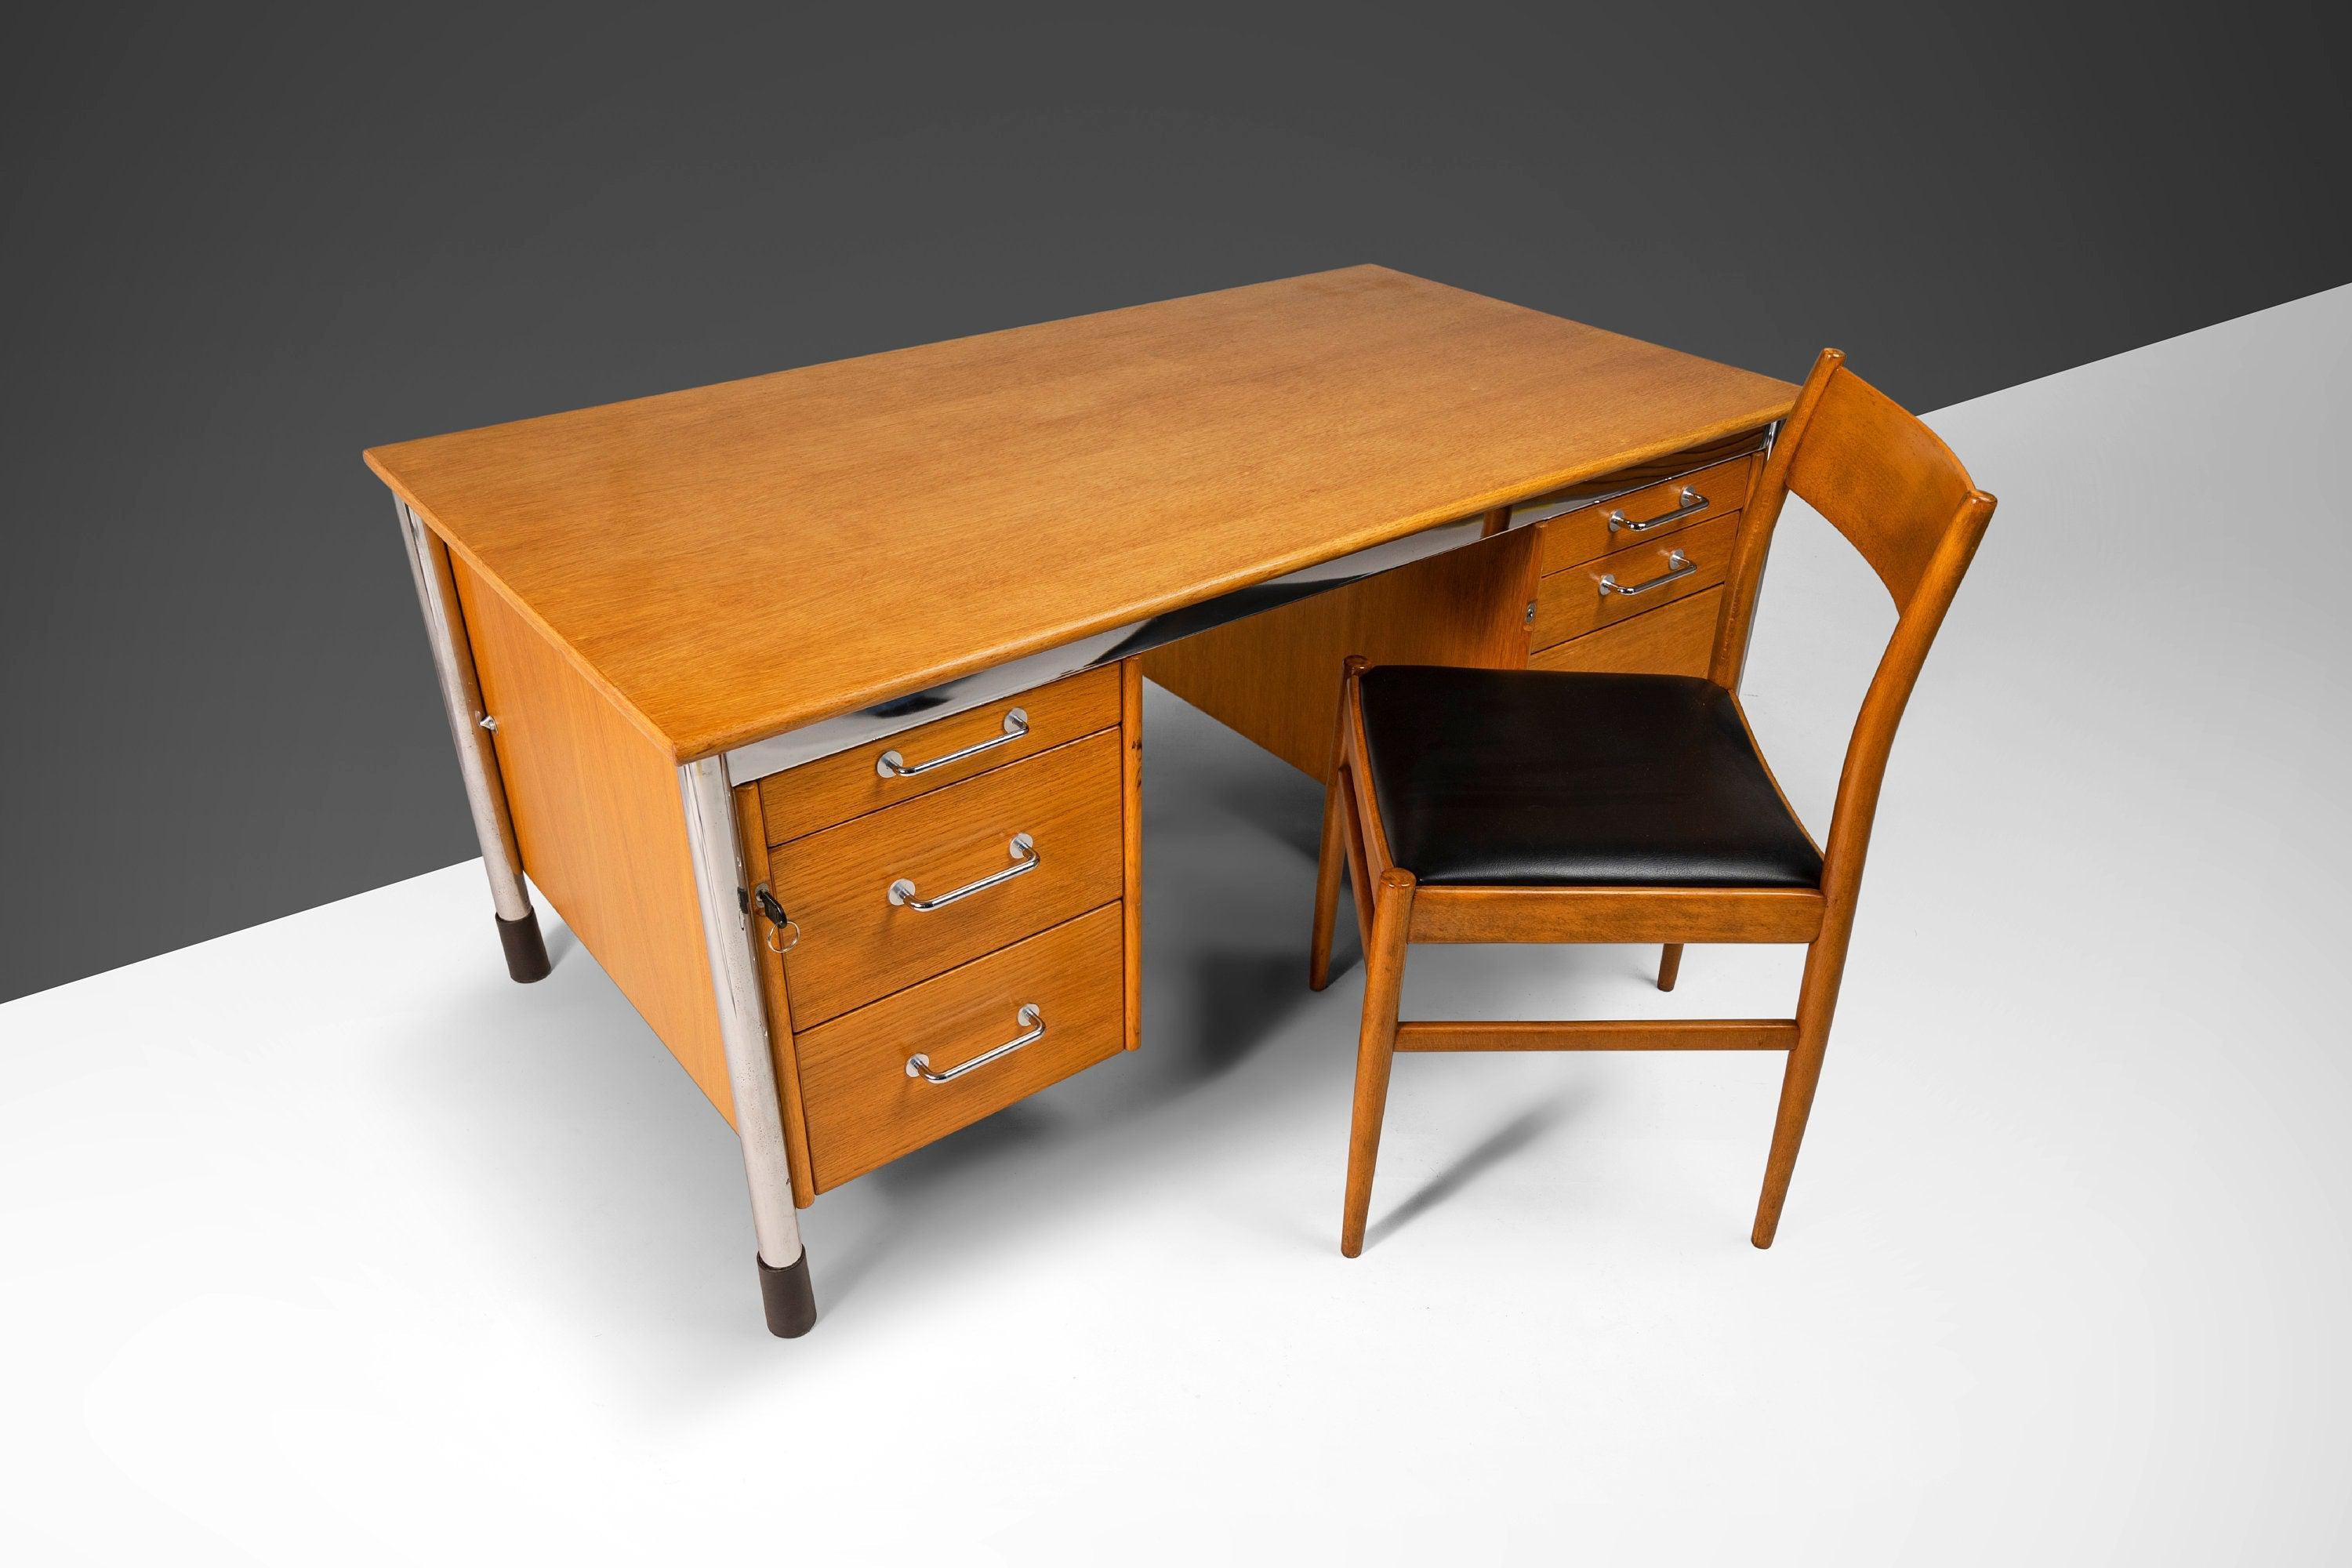 Swedish Signatur Executive Desk by Tord Bjorklund in Oak and Chrome, Sweden, c. 1980 For Sale